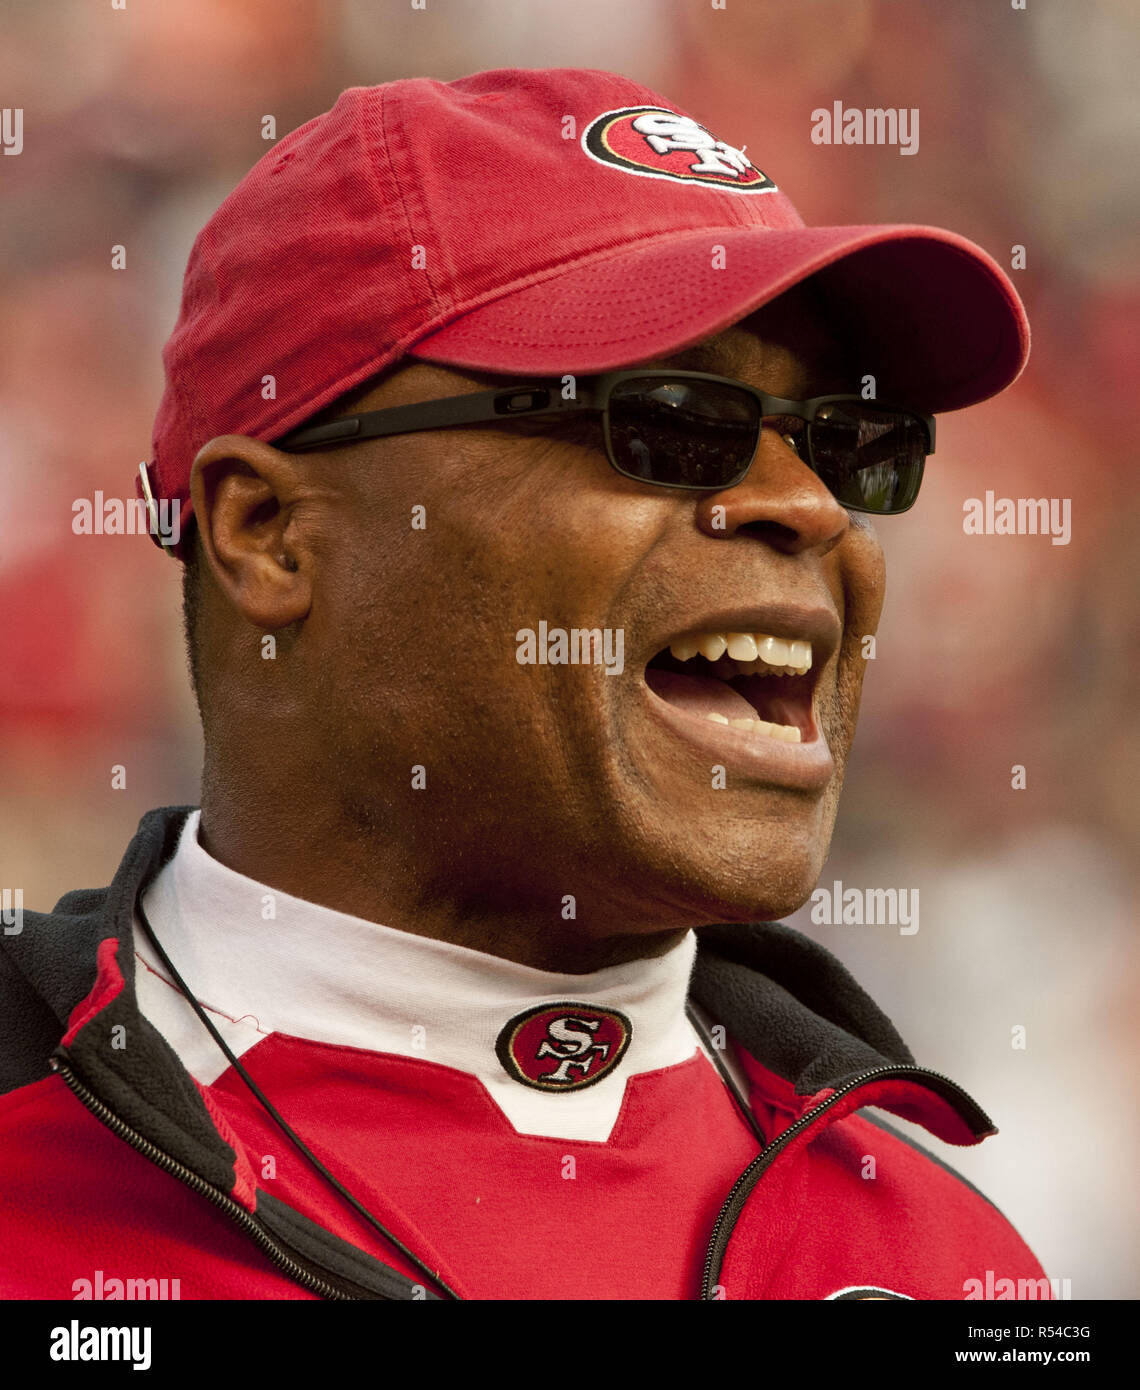 Image result for mike singletary coach